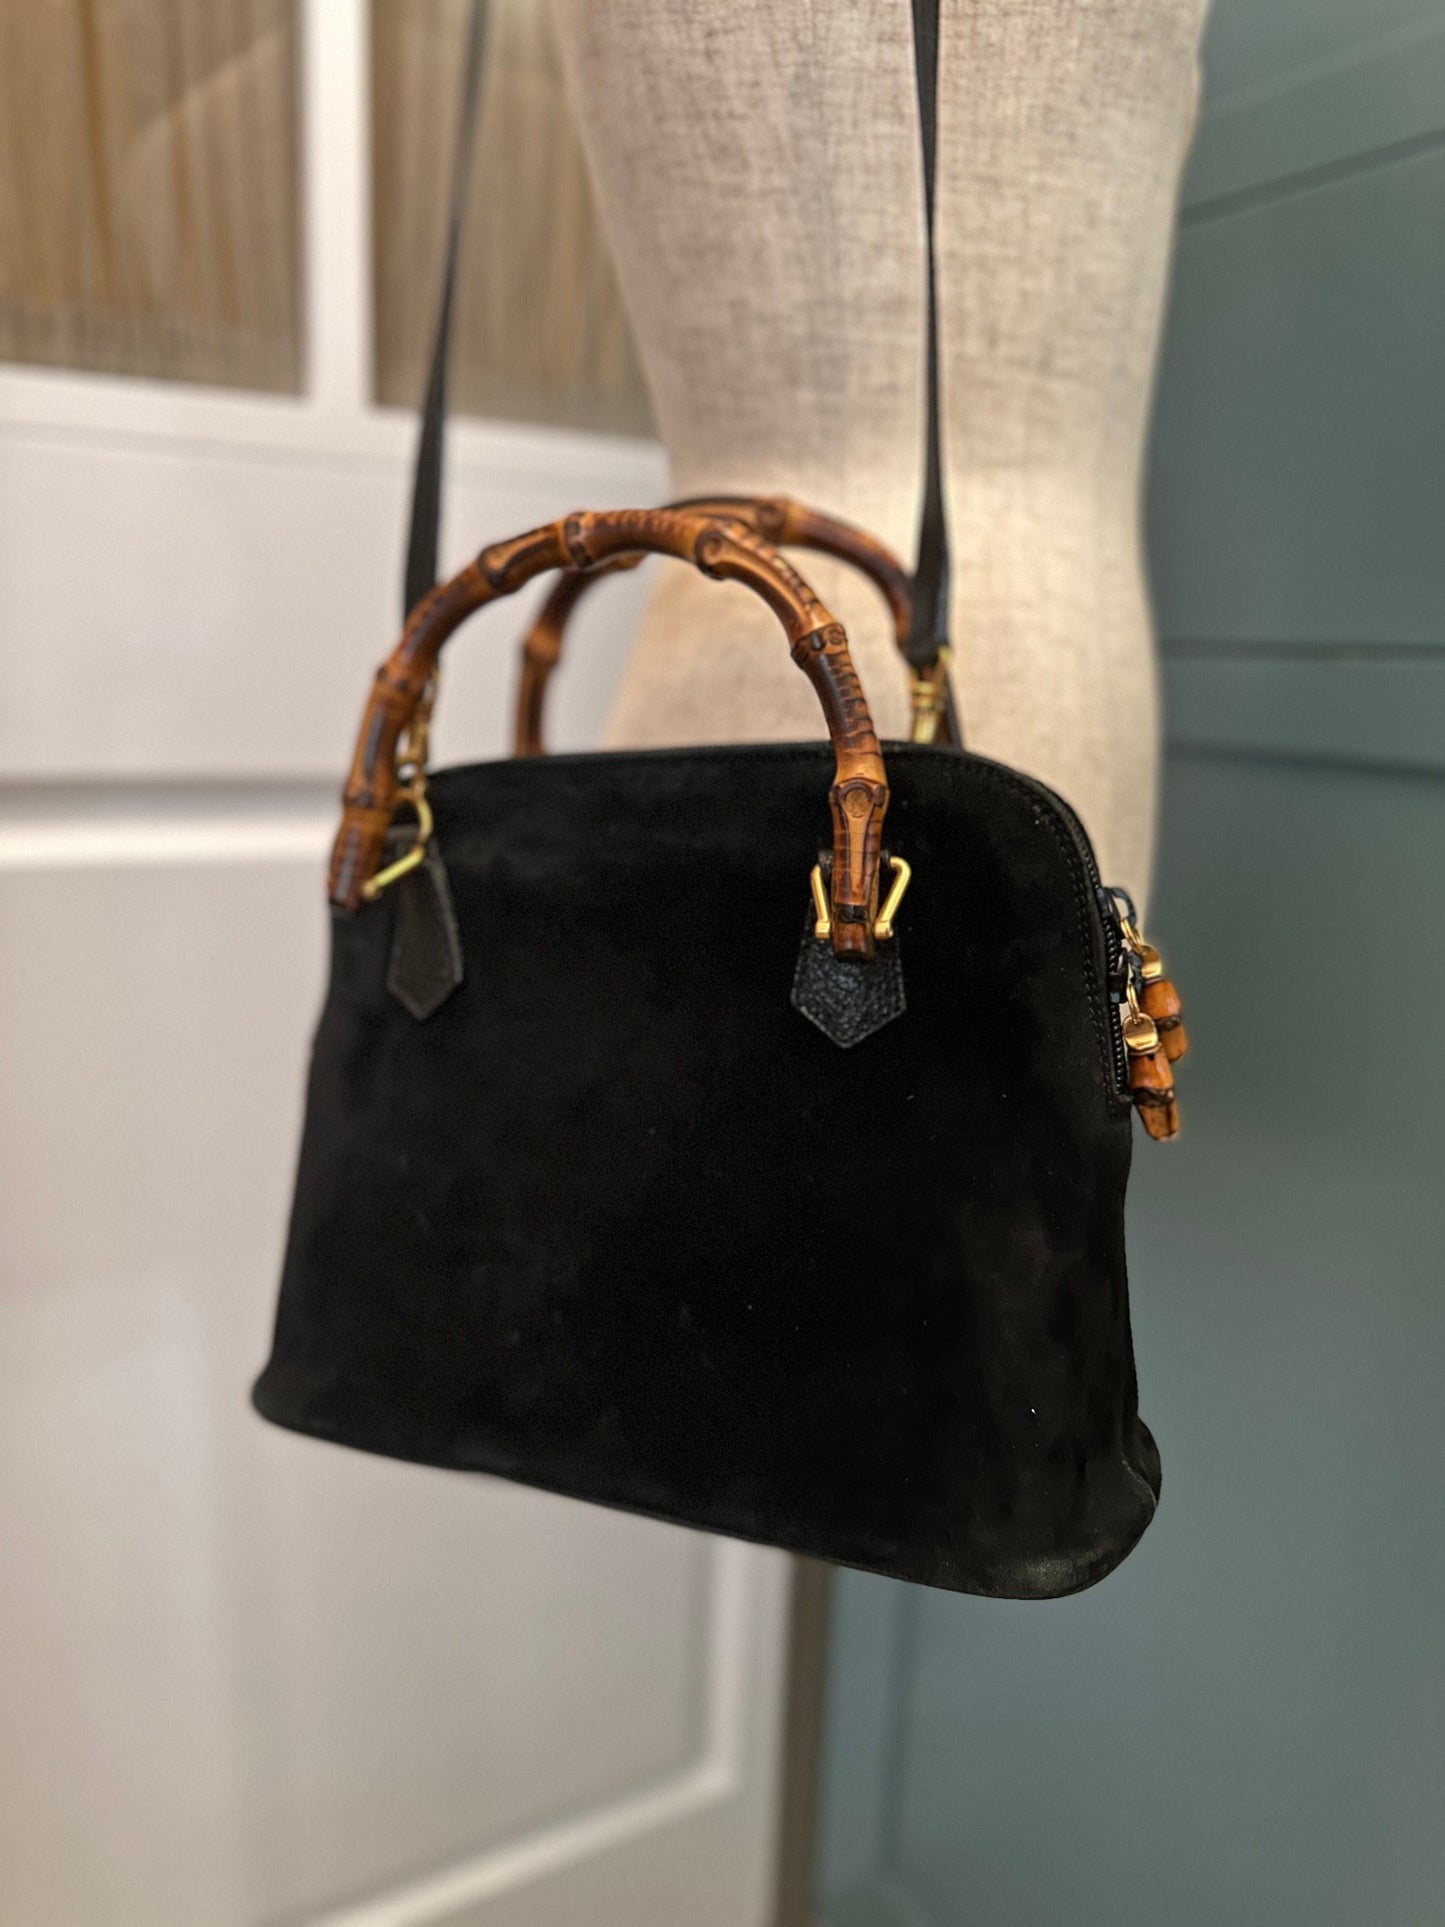 GUCCI VINTAGE 100% Authentic Genuine Large Suede Iconic Bamboo Handle Two-way Shoulder Bag, Black, 1990's, Great Condition, Rare